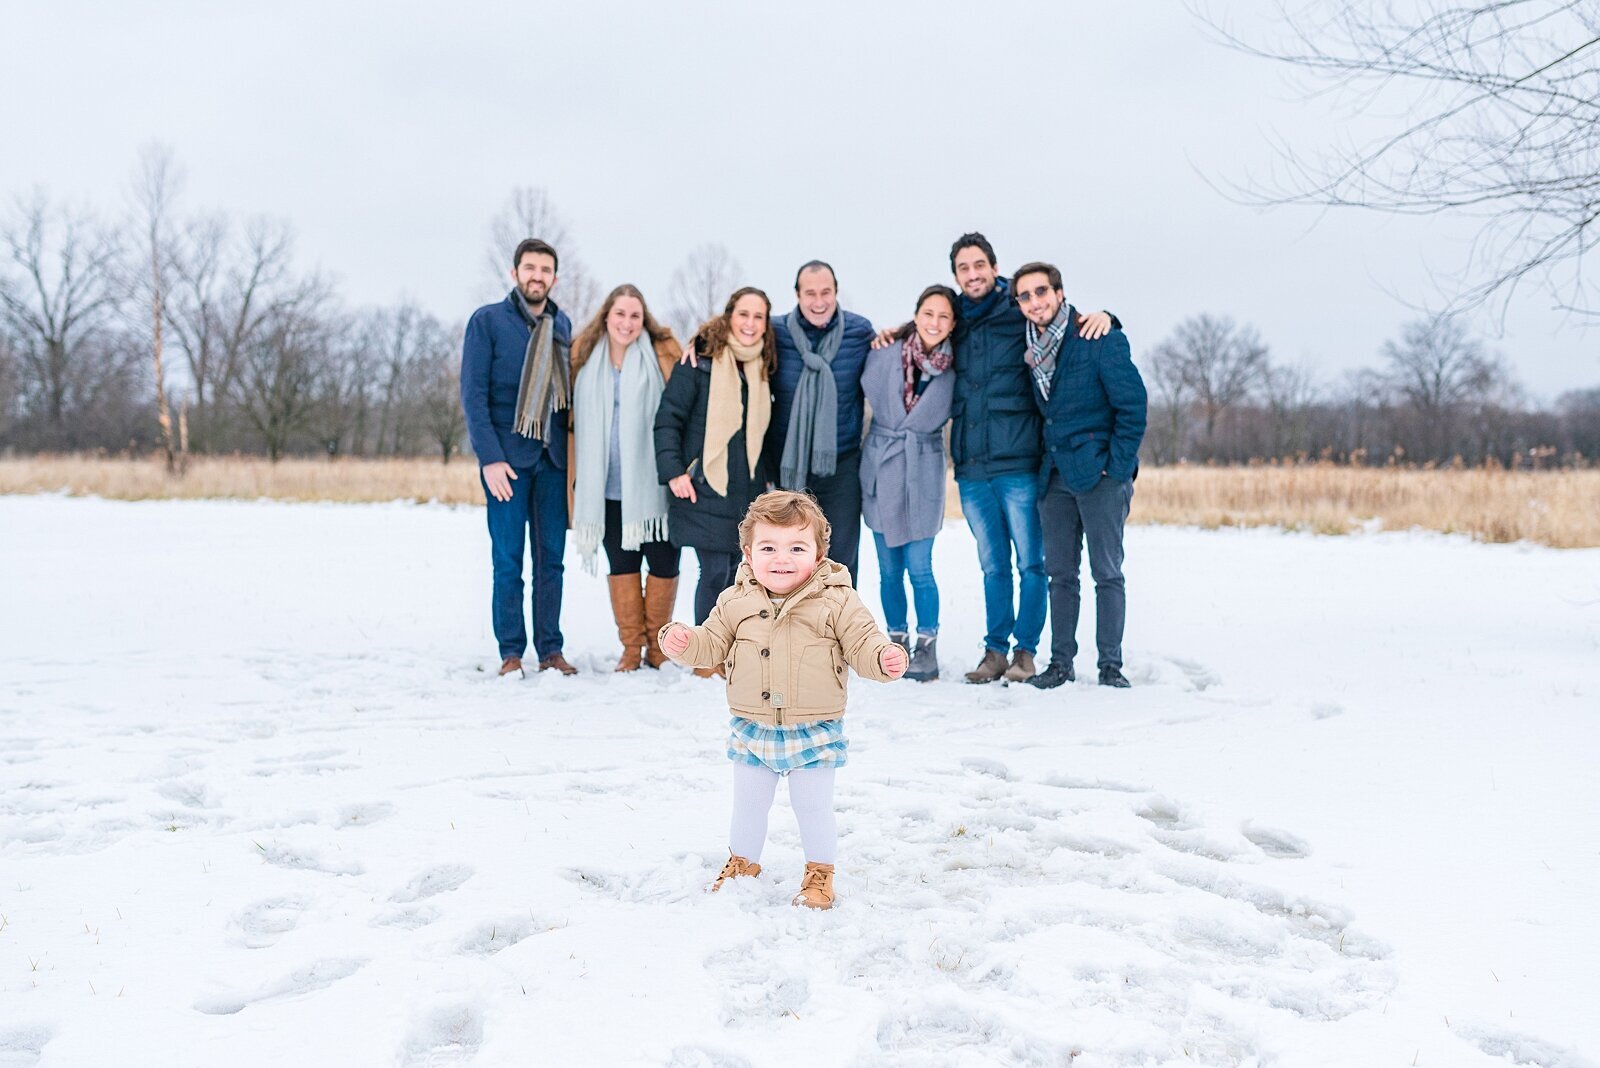 Extended family photos in the snow by Chicago photographer Kristen Hazelton